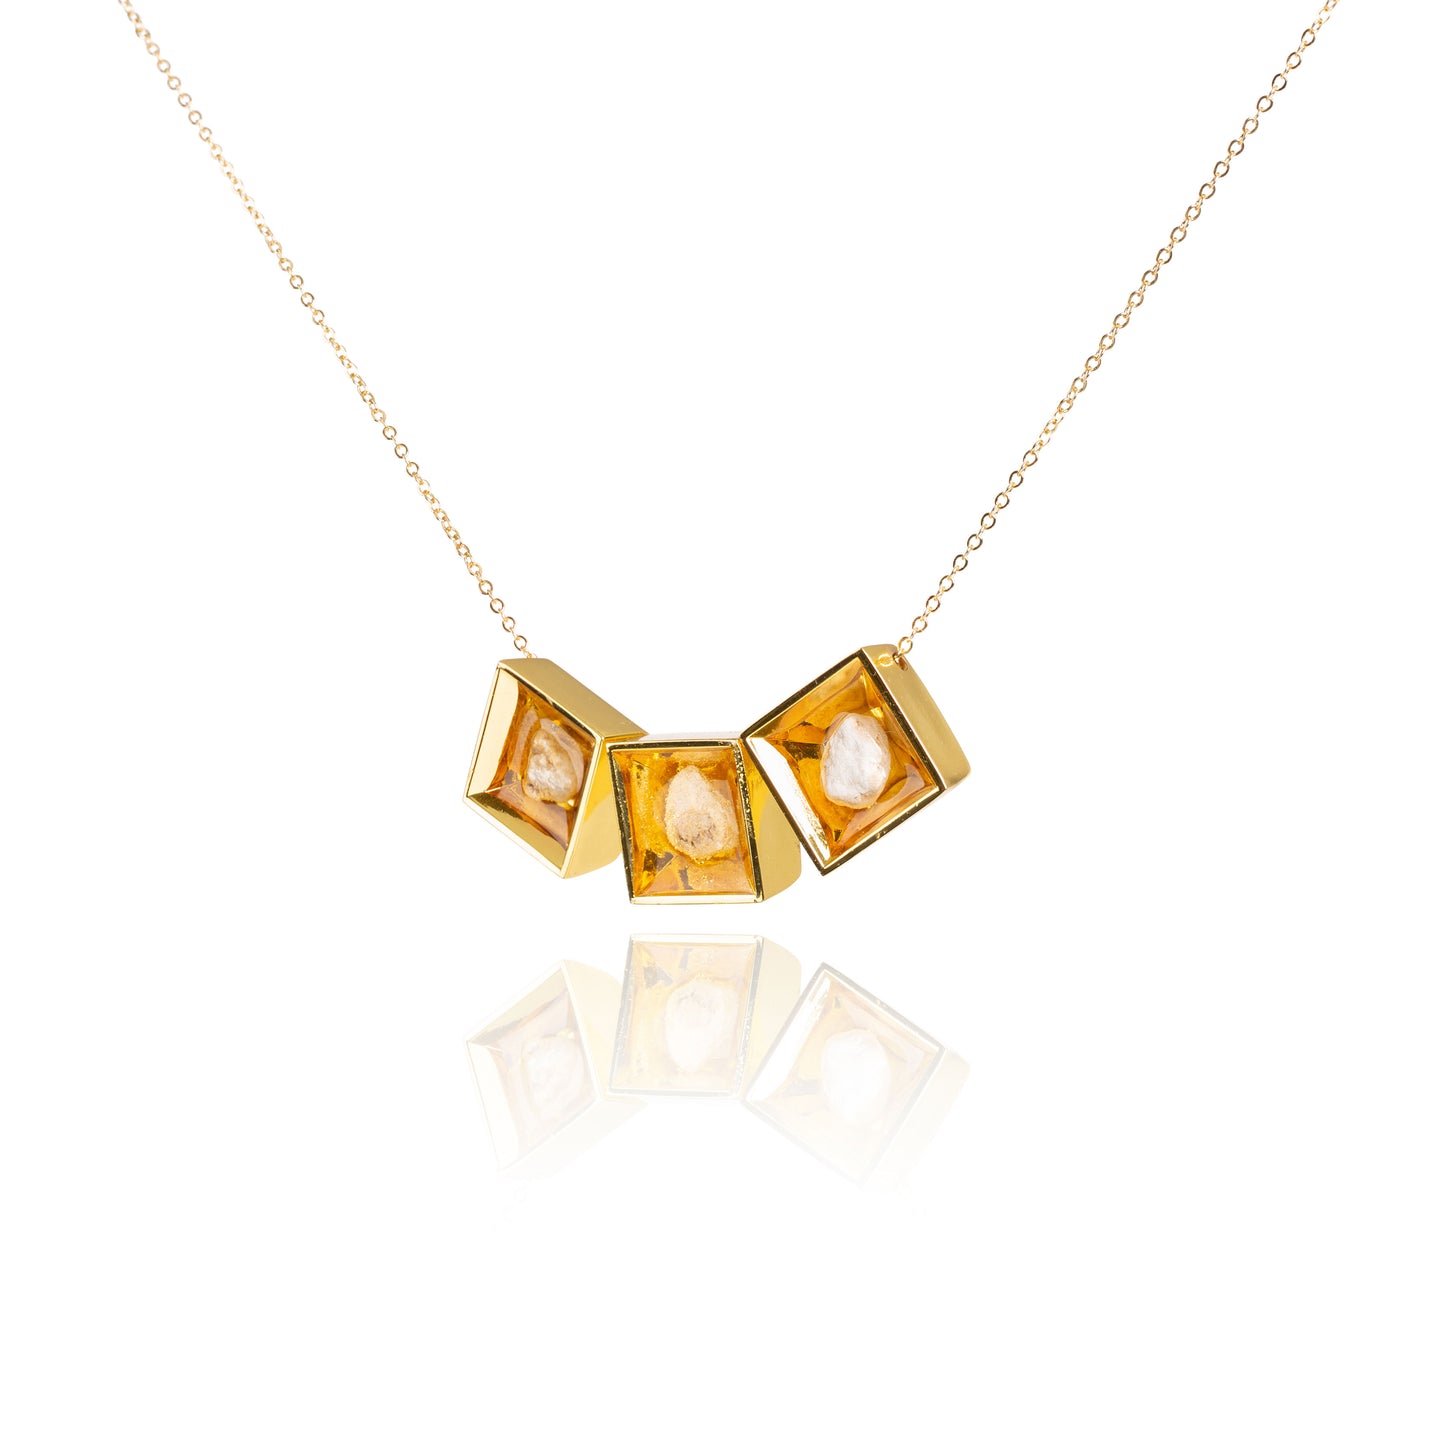 A side view of three small natural tan stones sitting in the middle of three separate square shaped metal pendants in a gold color. The pendants are hanging on a gold chain.